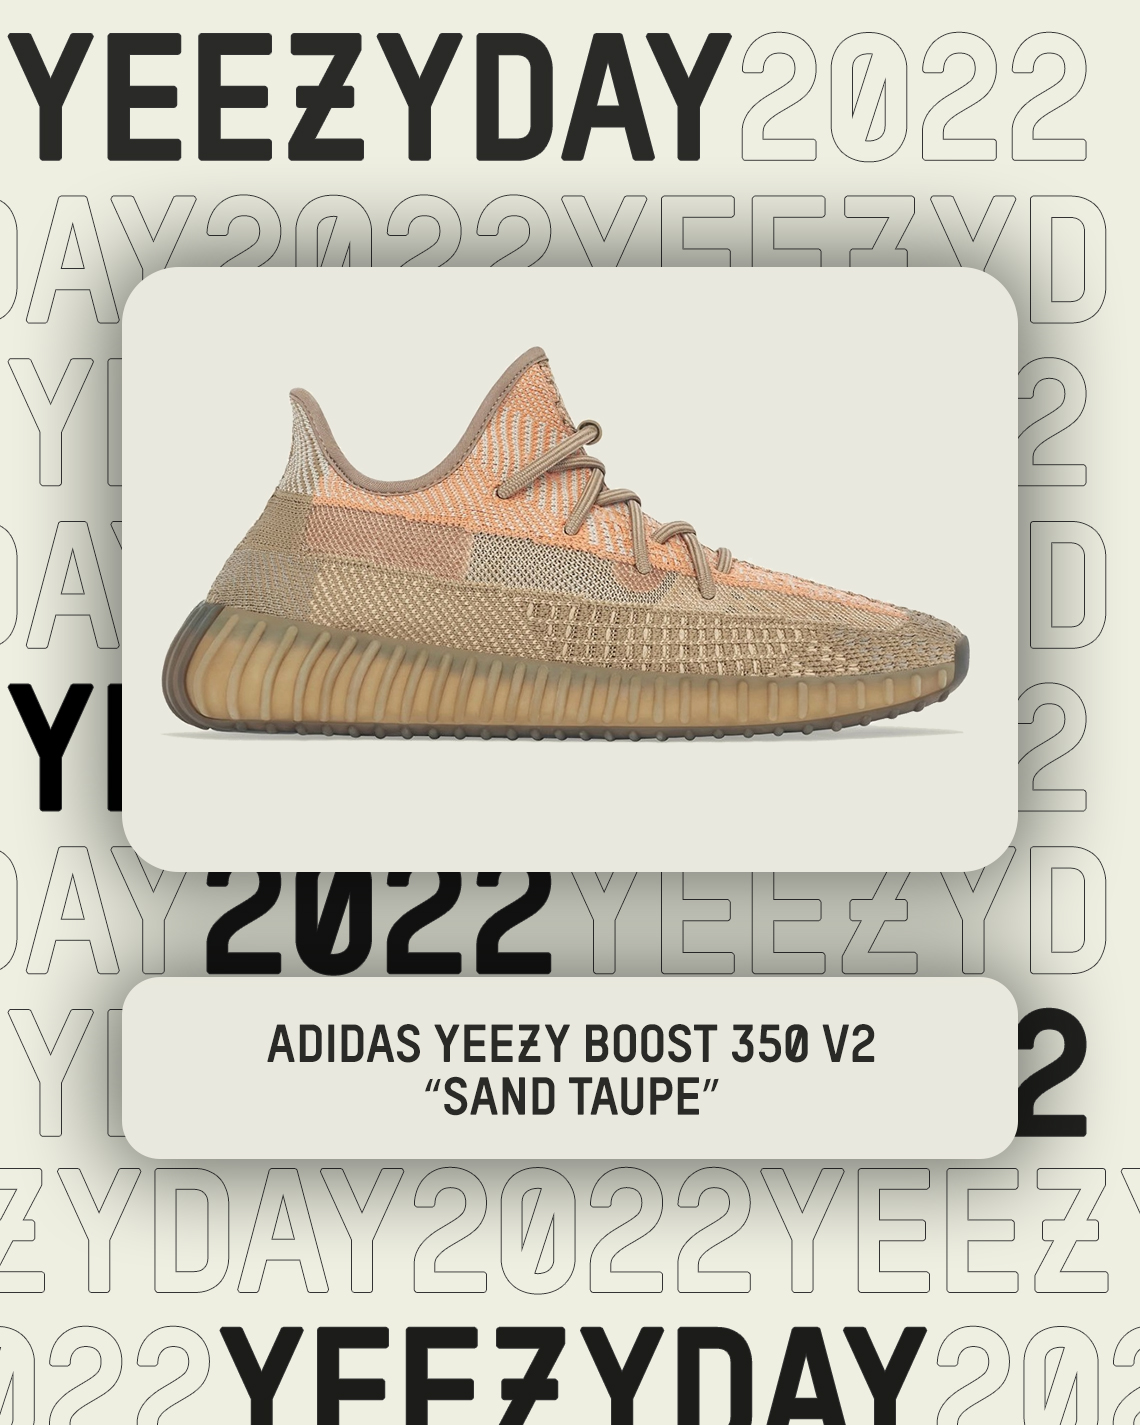 Yeezy Day 2022 adidas solar hu pack V2 Sand Taupe